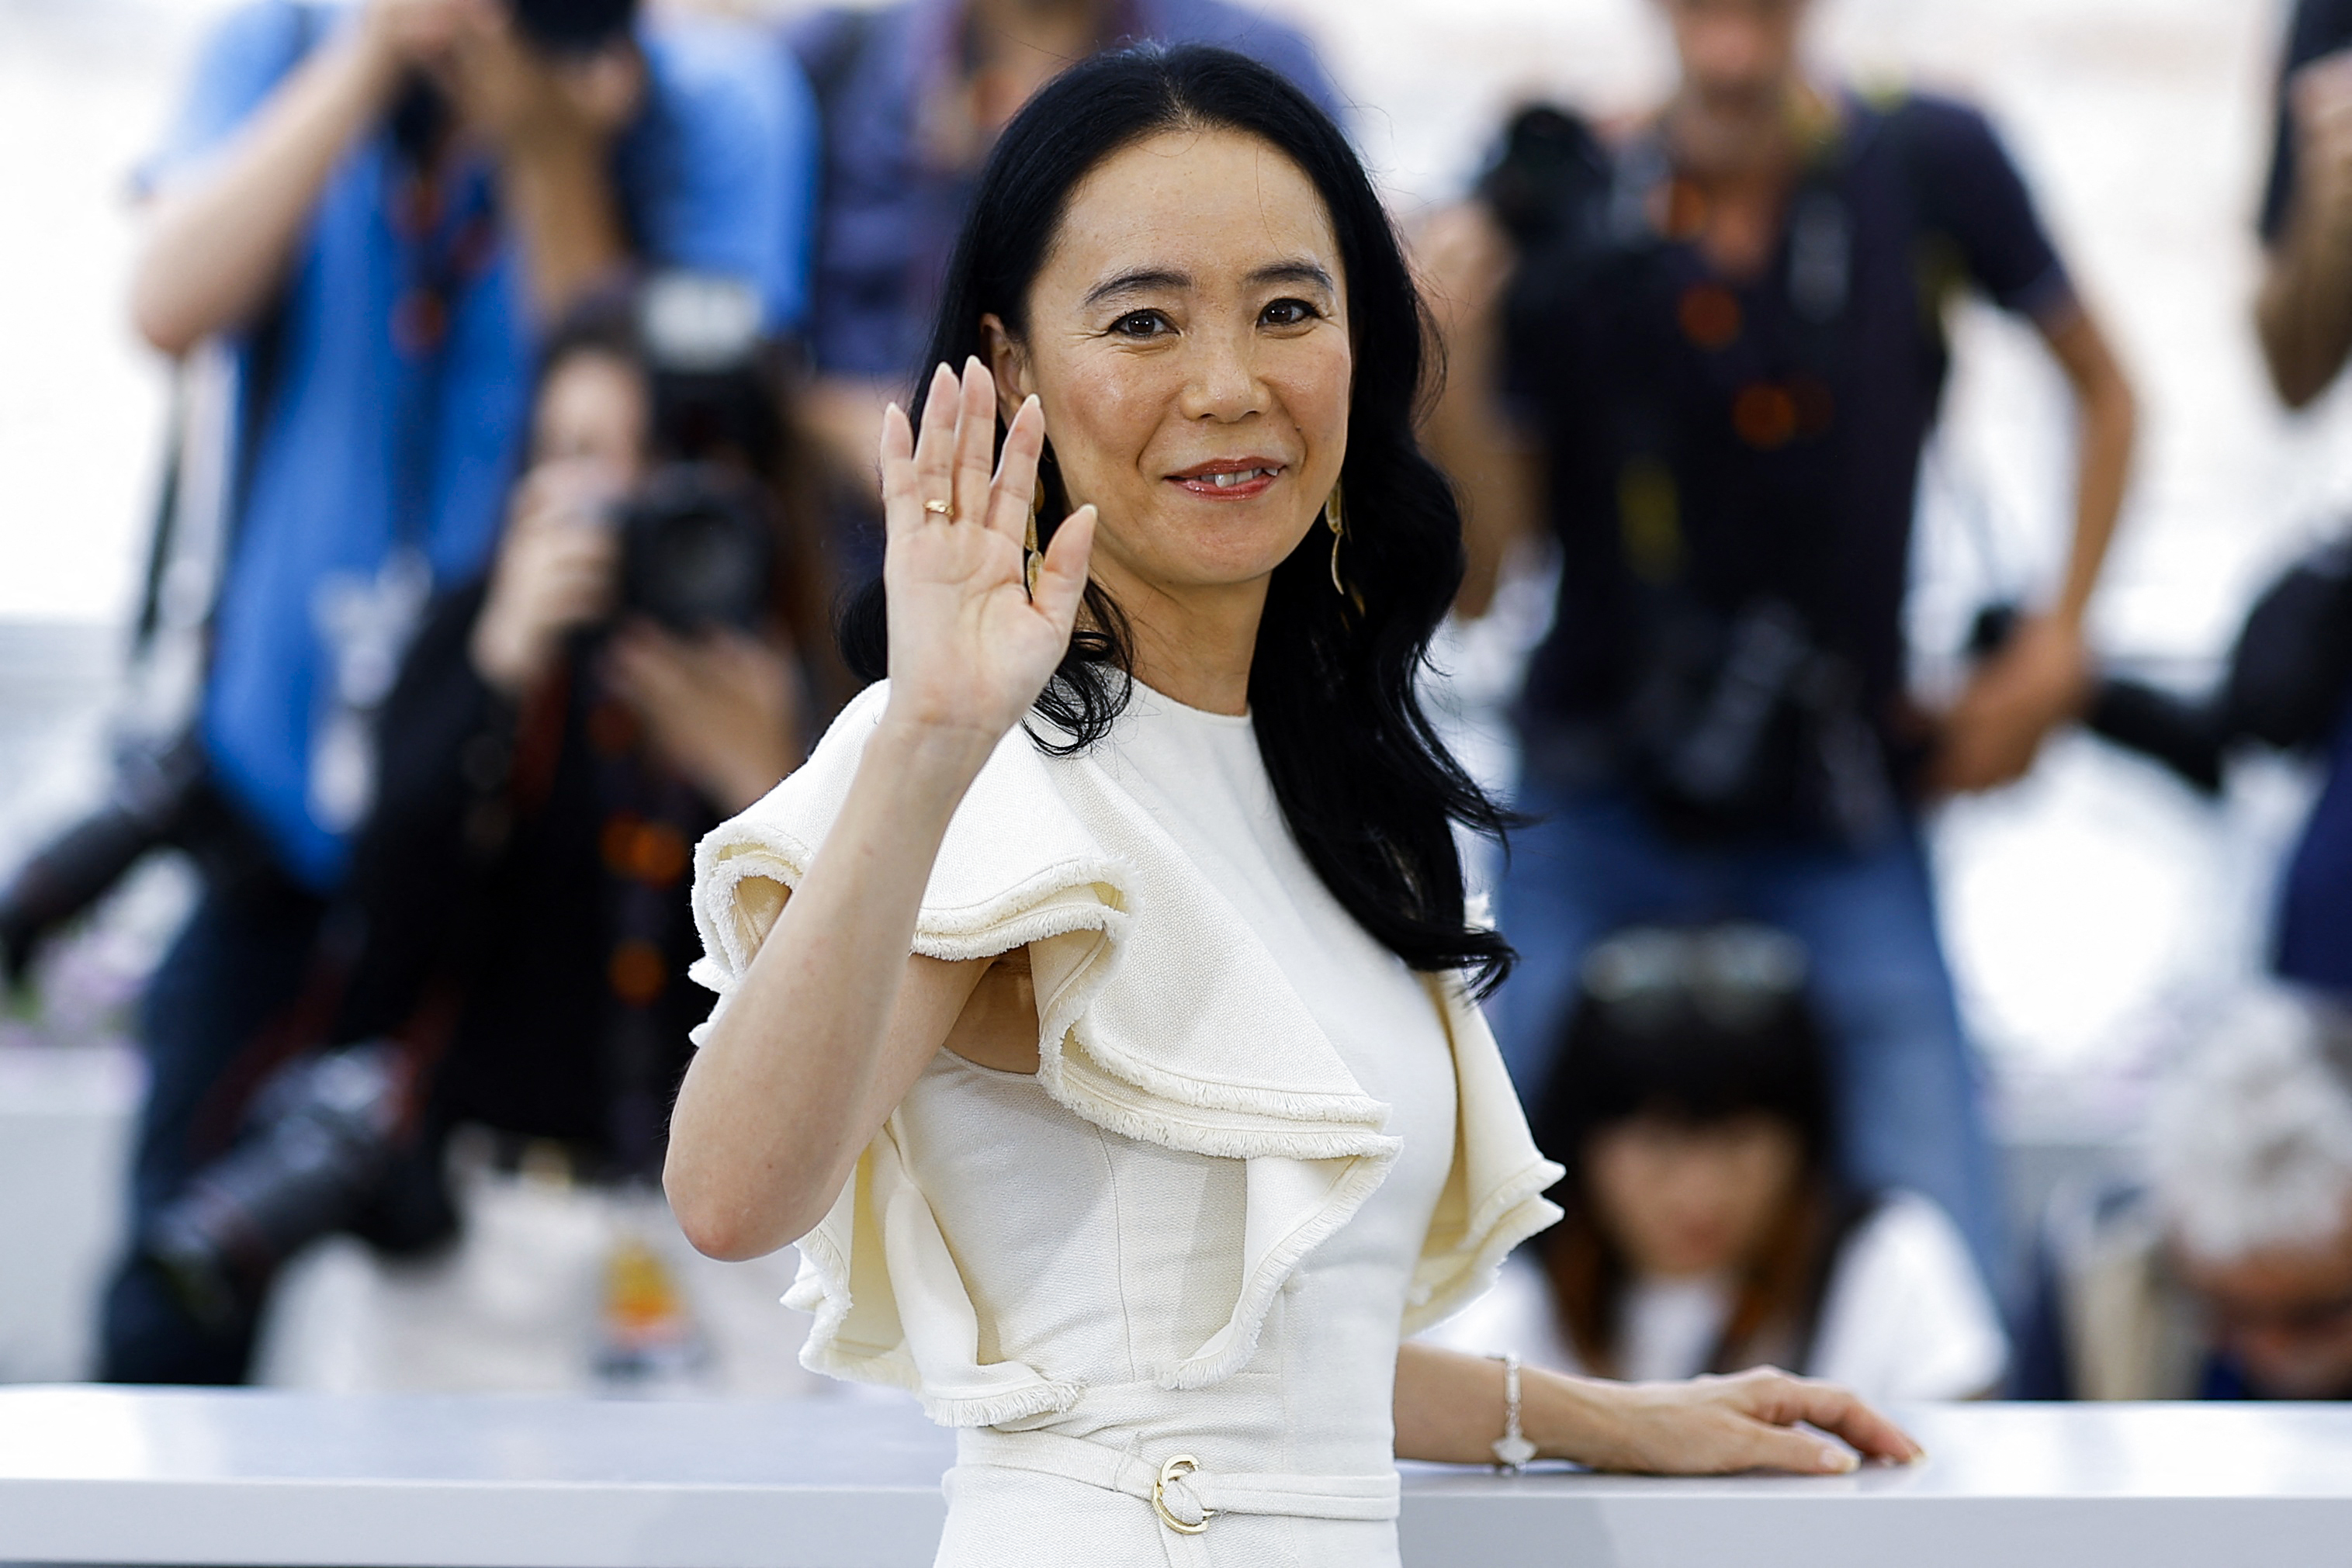 The 75th Cannes Film Festival - Photocall for the film " Official Film of the Olympic Games Tokyo 2020 Side A" presented as part of Cannes Classics - Cannes, France, May 26,  2022. Director Naomi Kawase poses. REUTERS/Stephane Mahe